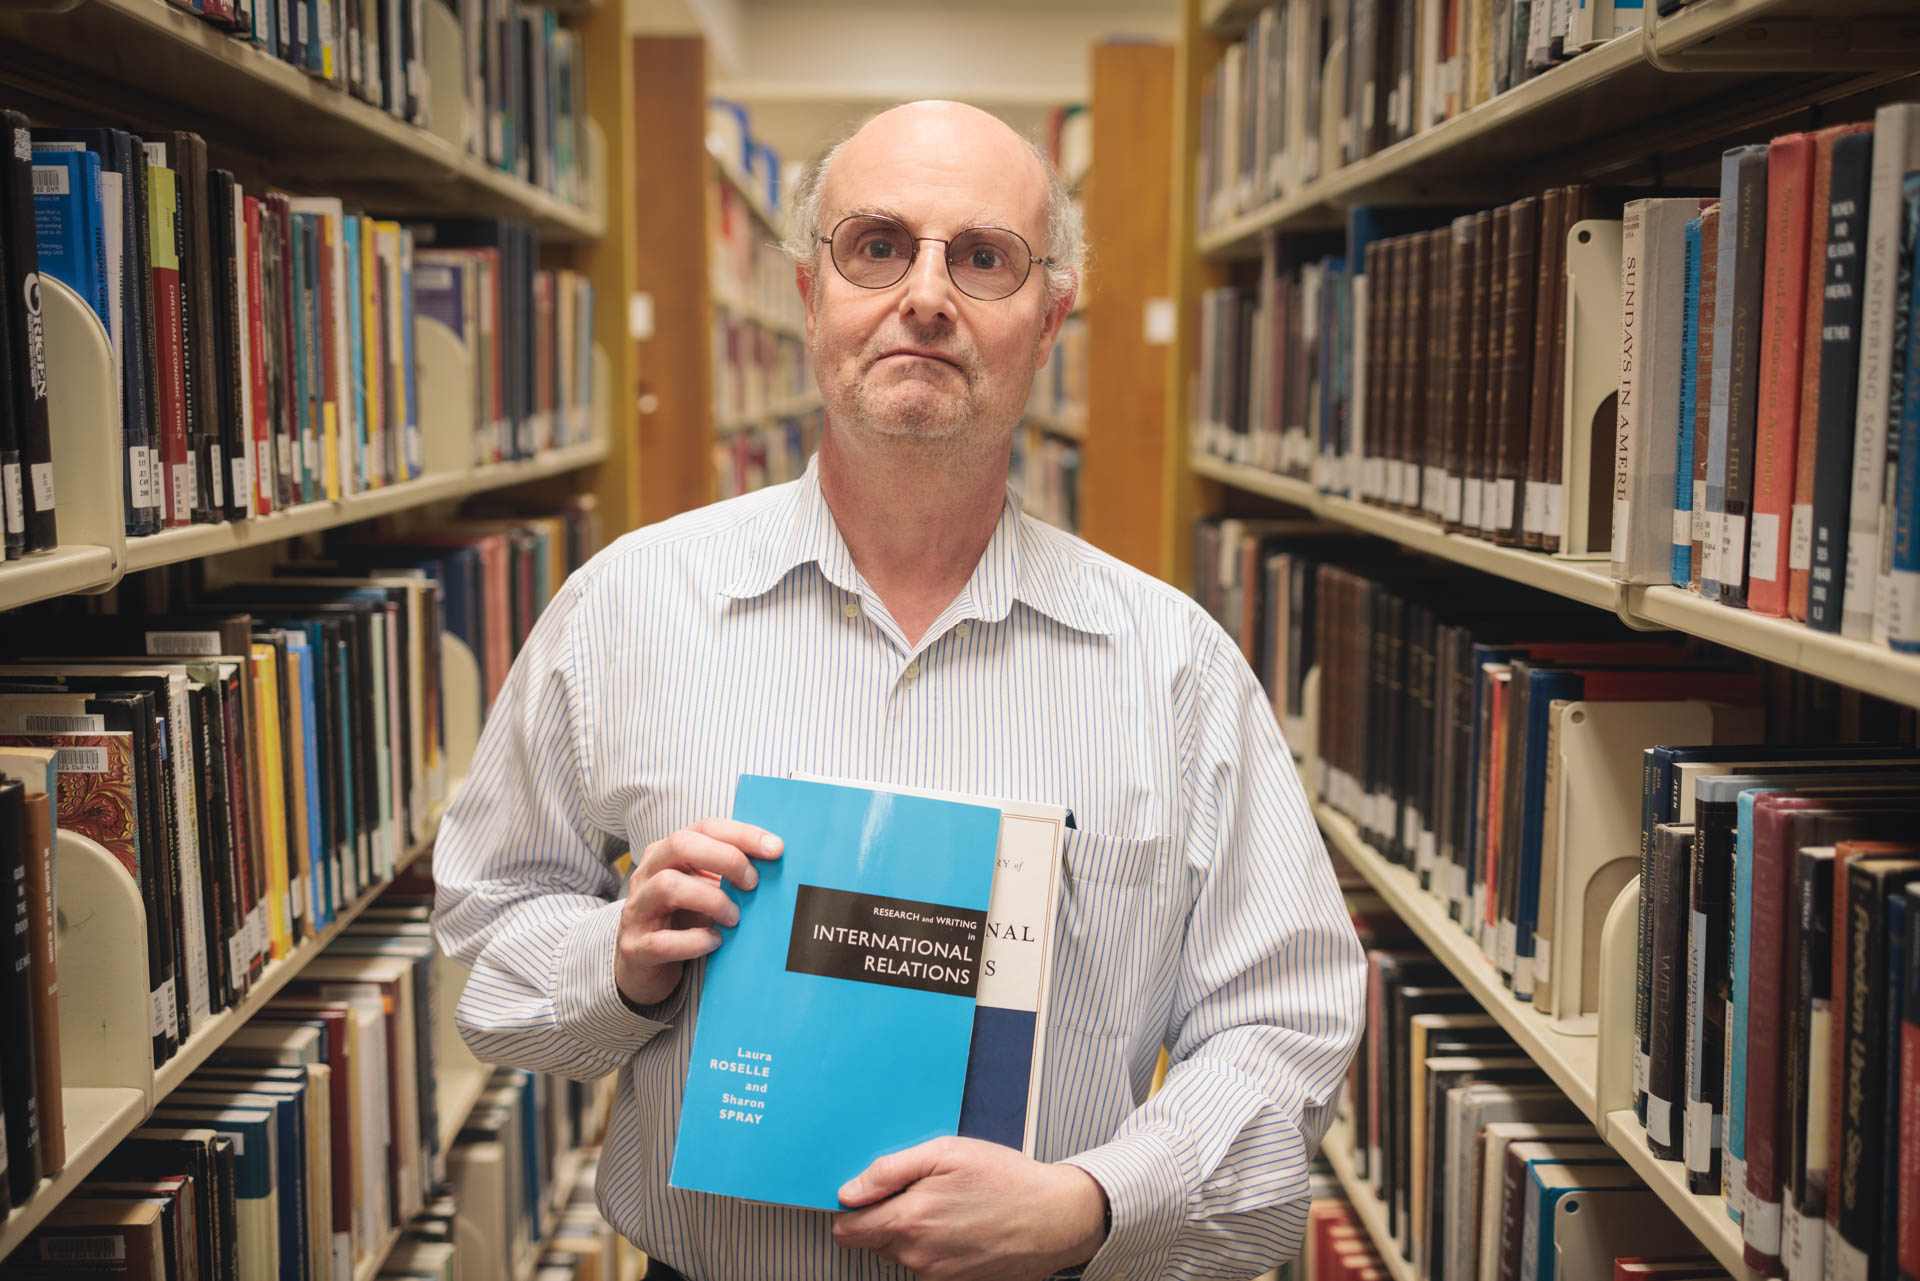 Out of 1,500 nominees, David Ettinger was one of just 10 librarians nationwide to win the American Library Association’s I Love My Librarian Award. (William Atkins/GW Today)